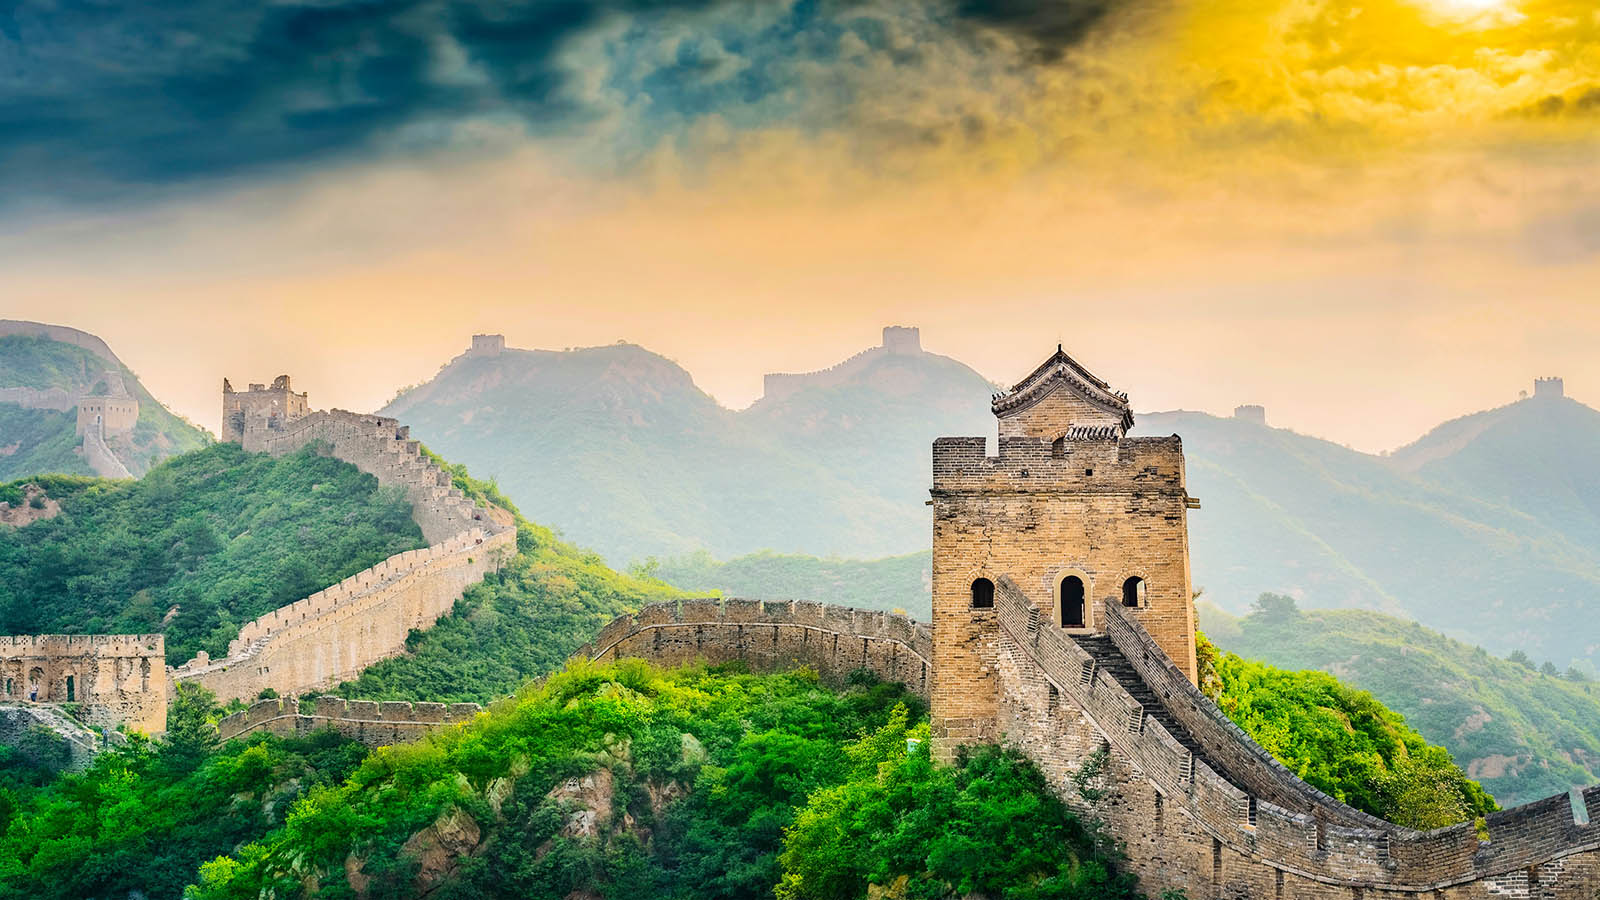 We’ll Give You an 🌮 International Food to Try Based on the ✈️ Places You Would Rather Visit The Great Wall Of China